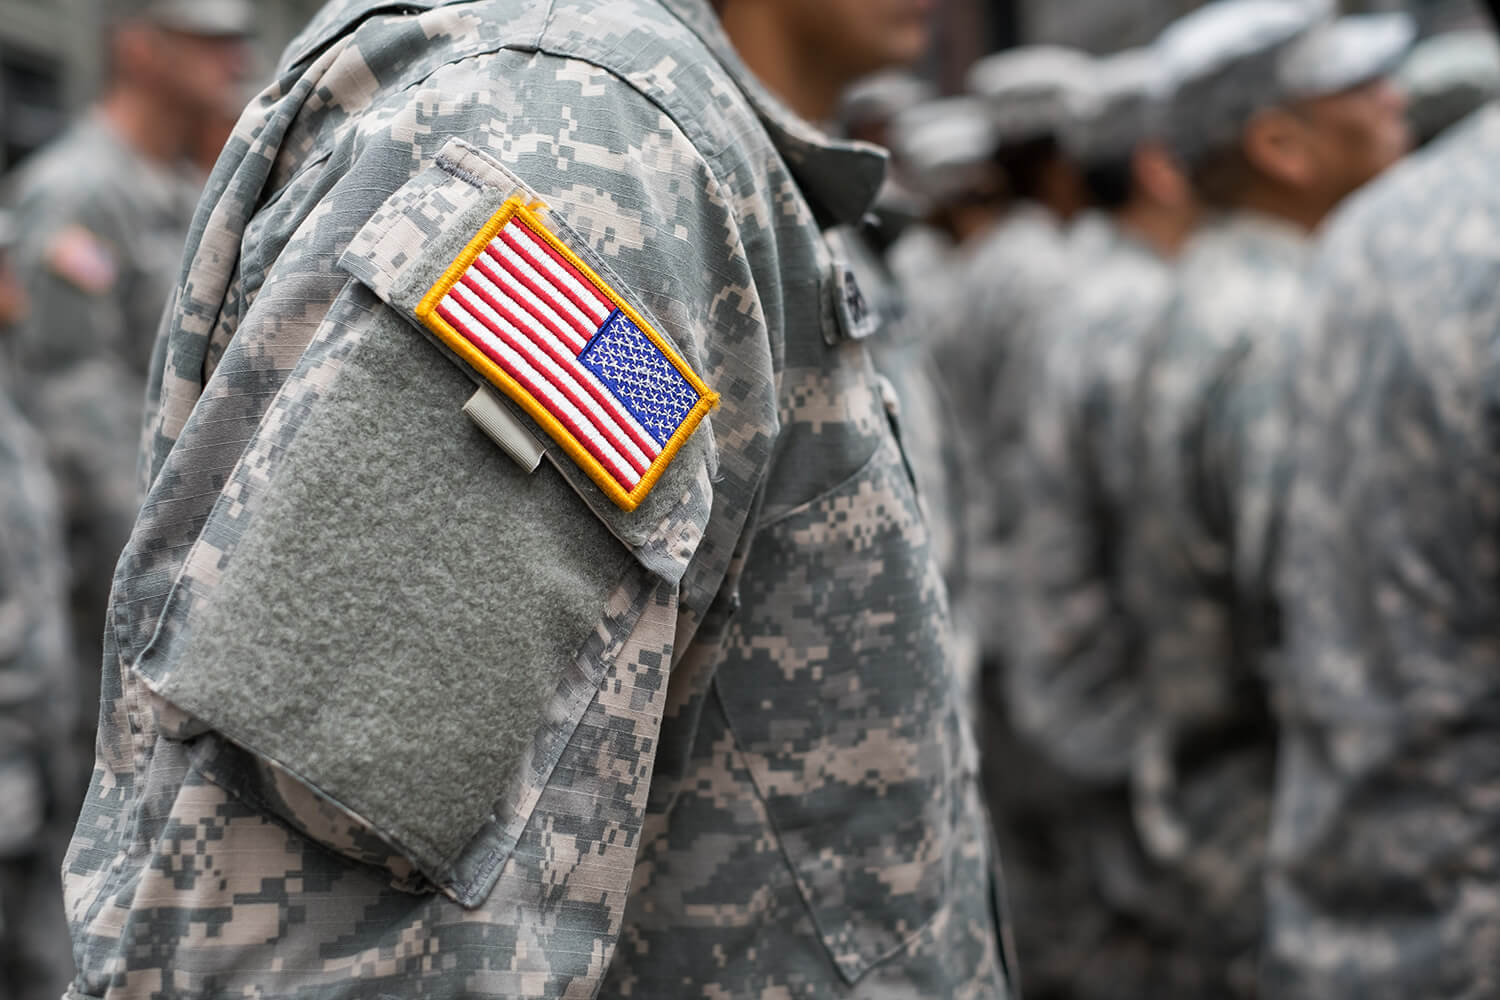 military patches on a soldier in line with other fellow soldiers